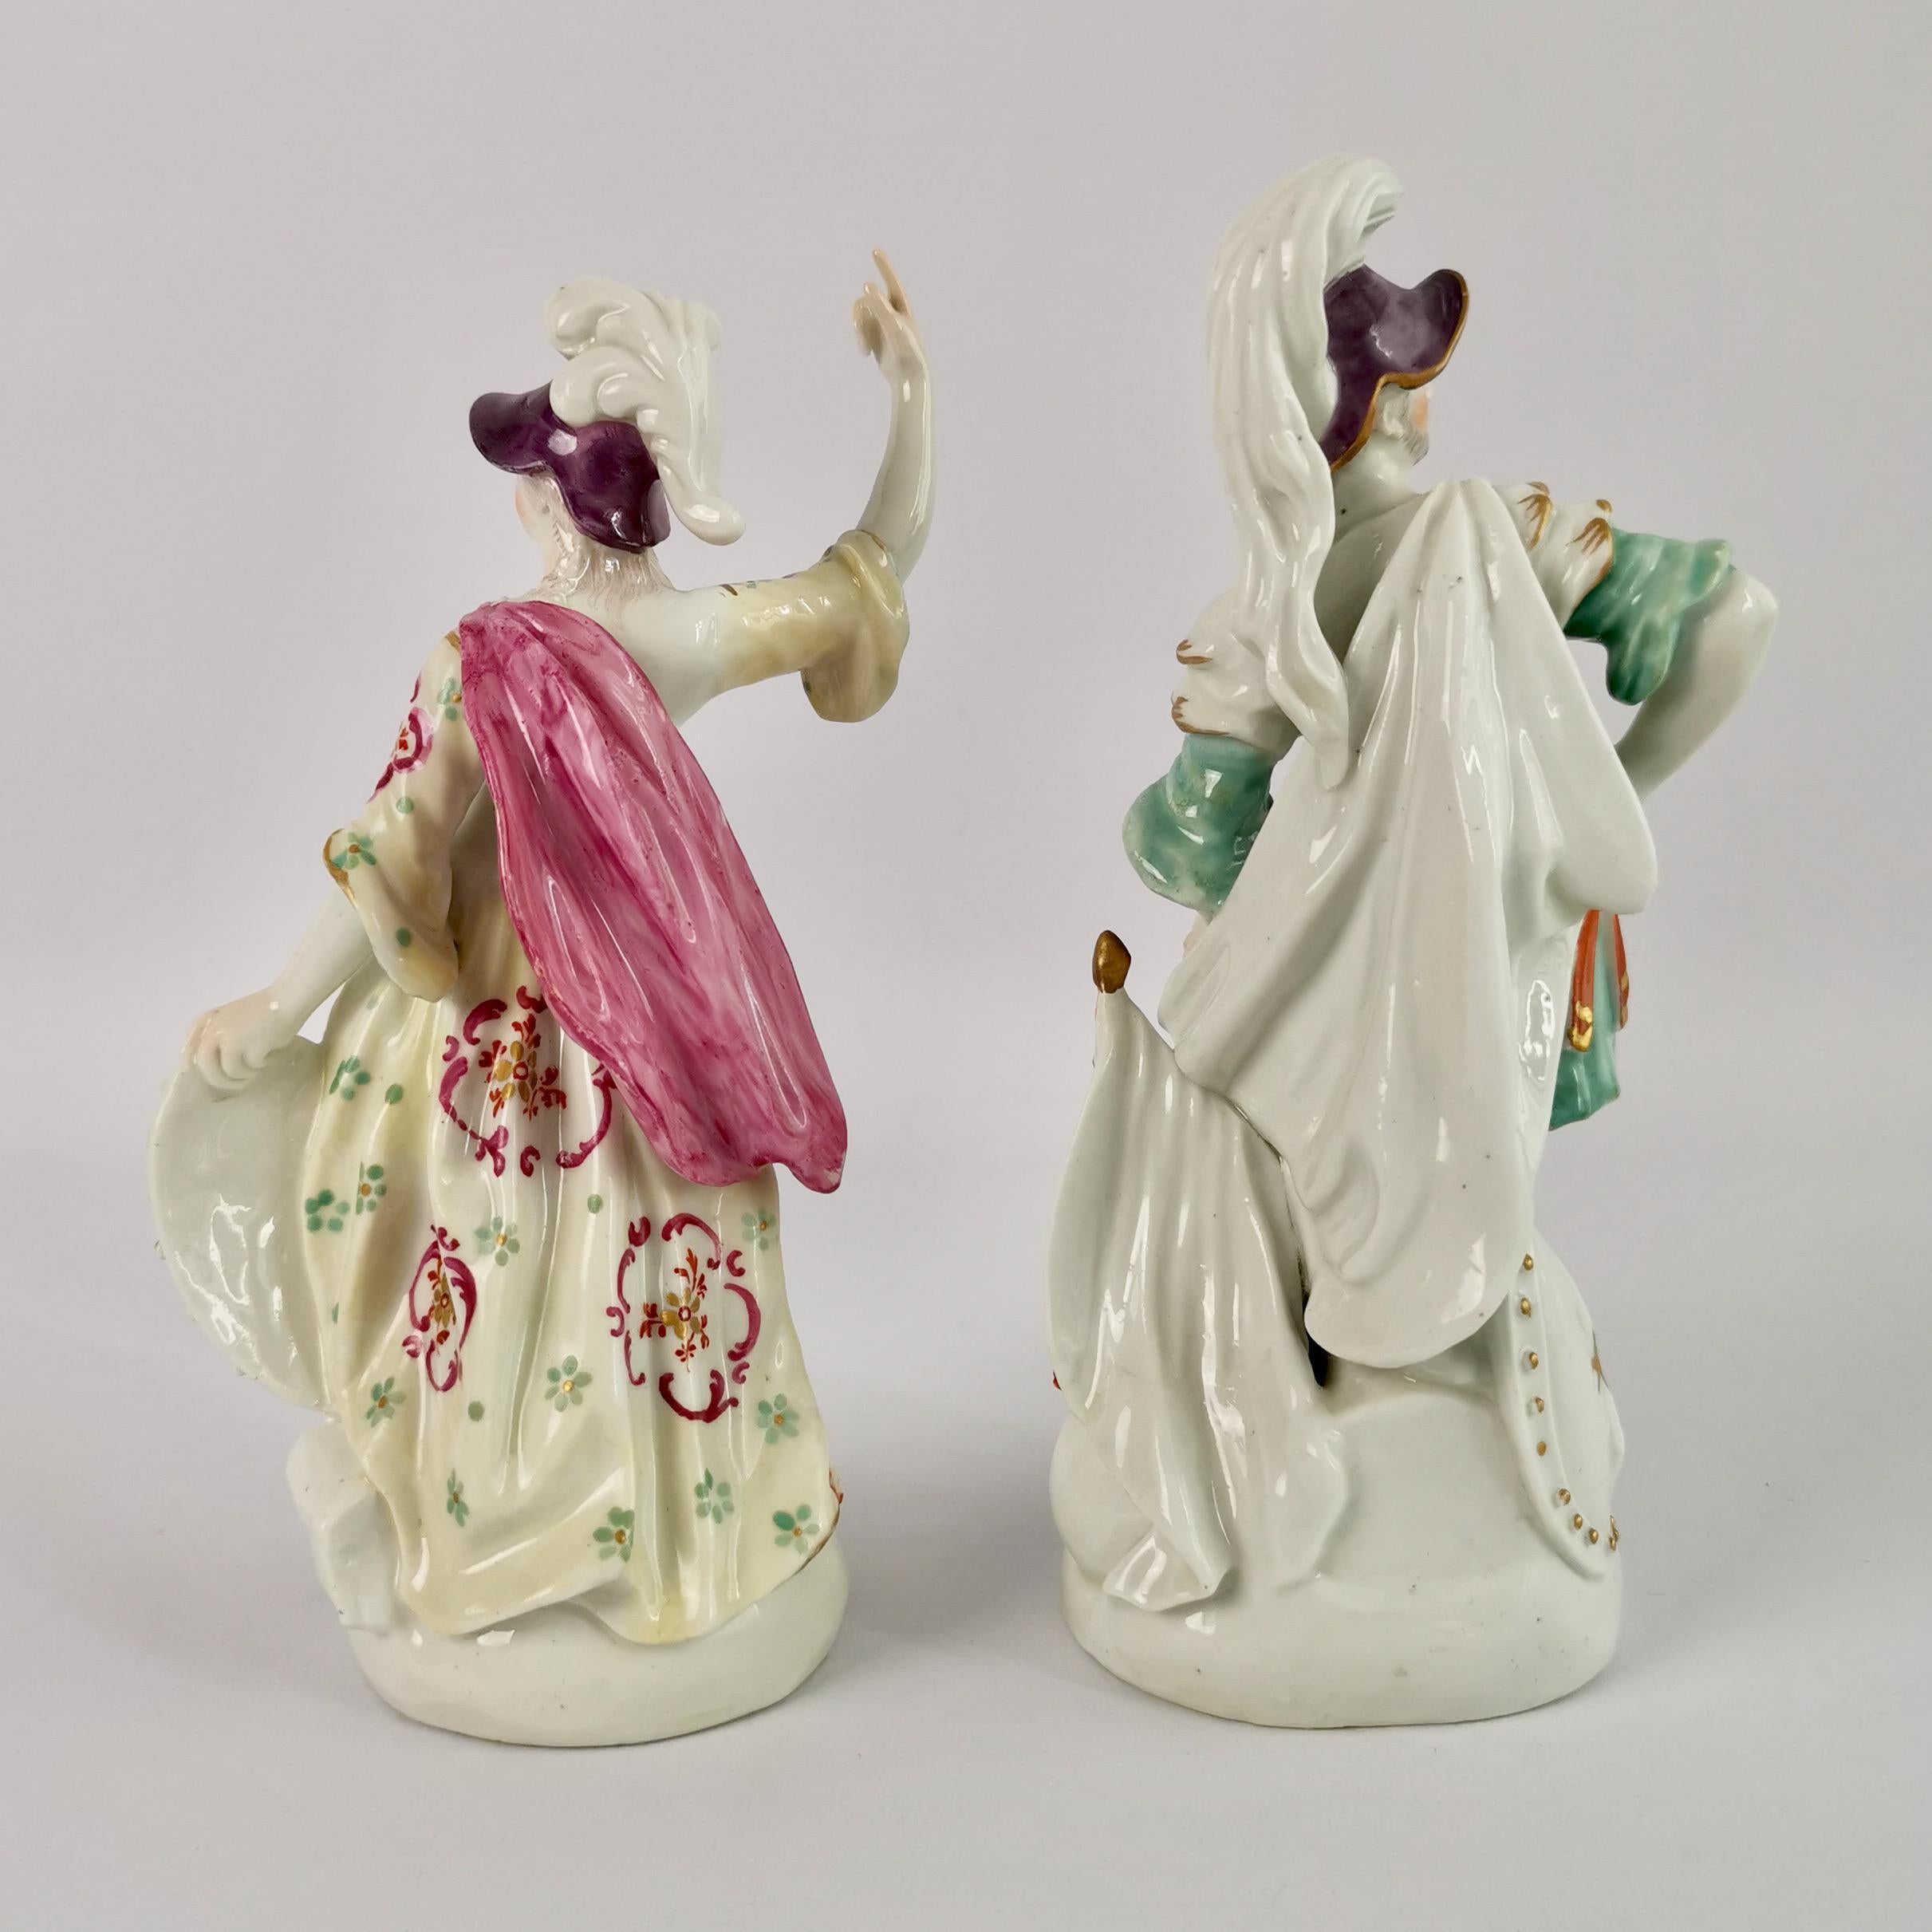 English Derby Porcelain Figures of Mars and Minerva, Rococo, circa 1765